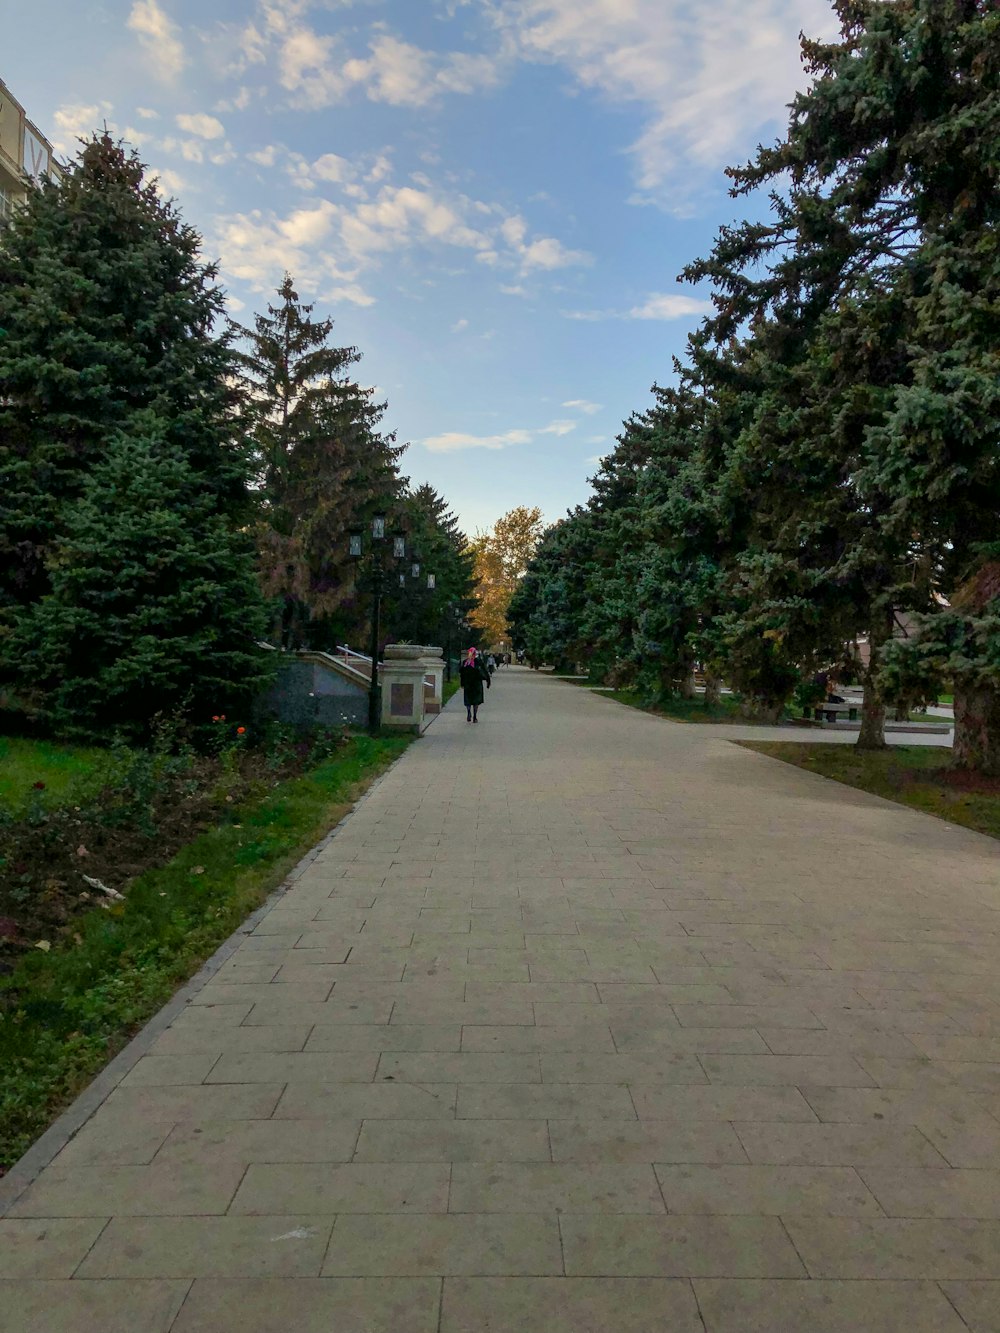 a person walking on a path surrounded by trees and grass